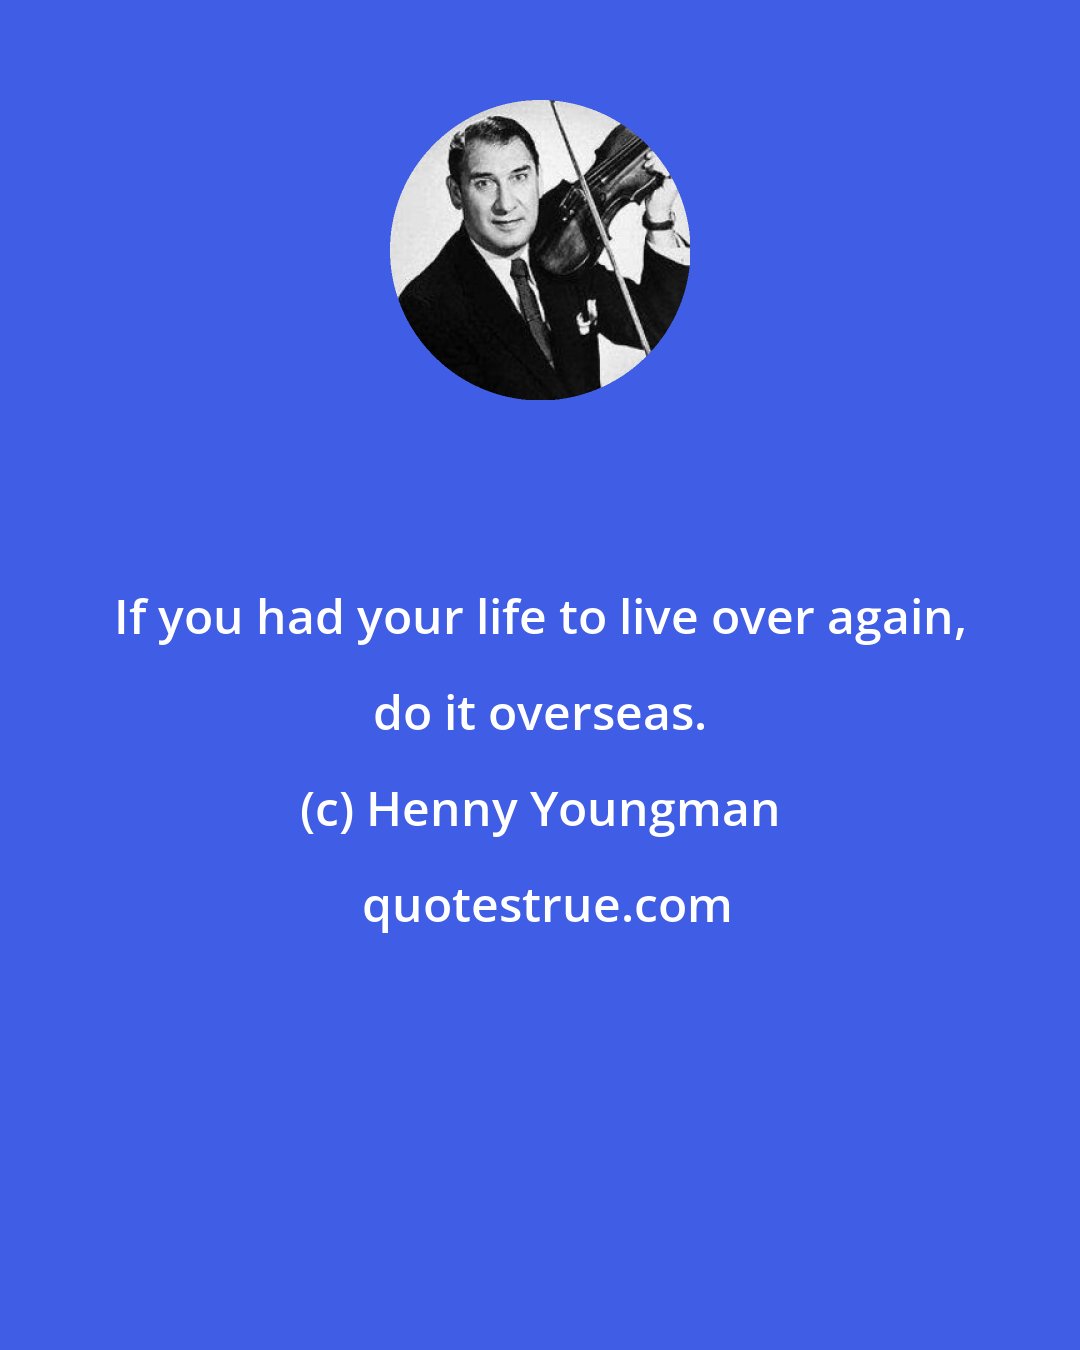 Henny Youngman: If you had your life to live over again, do it overseas.